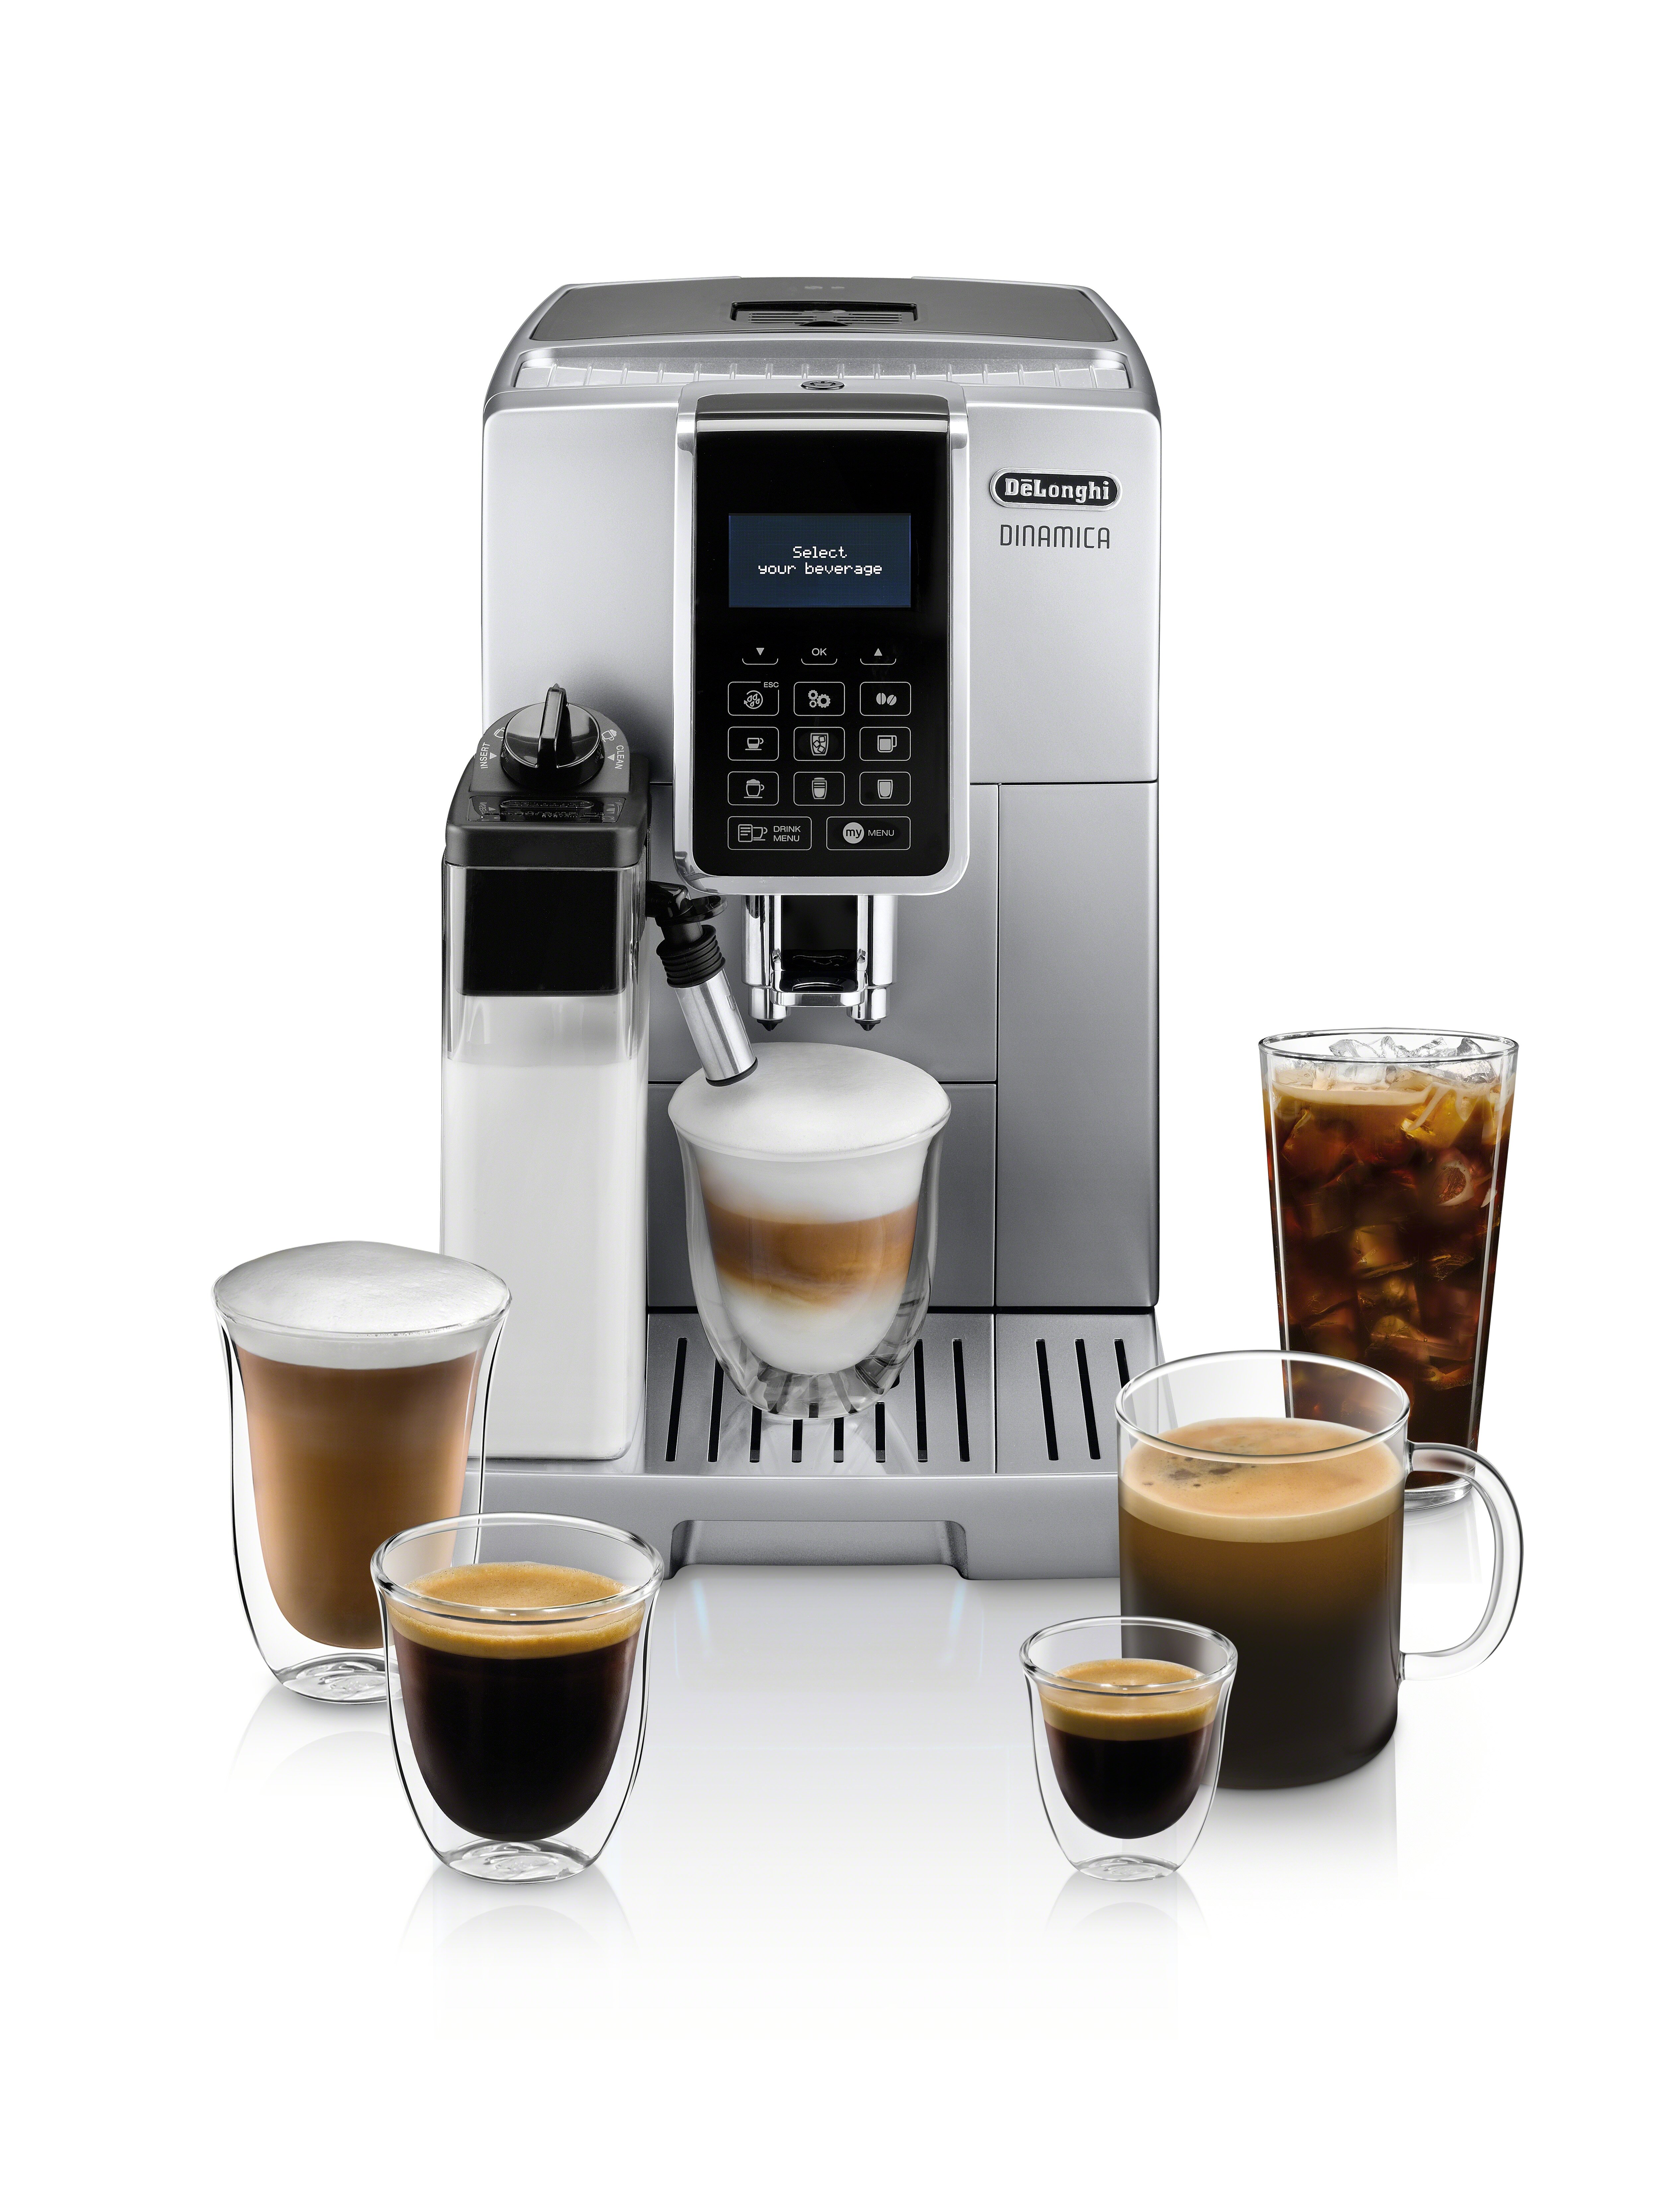 De'Longhi Dinamica with LatteCrema System and LCD Display, Silver & Reviews